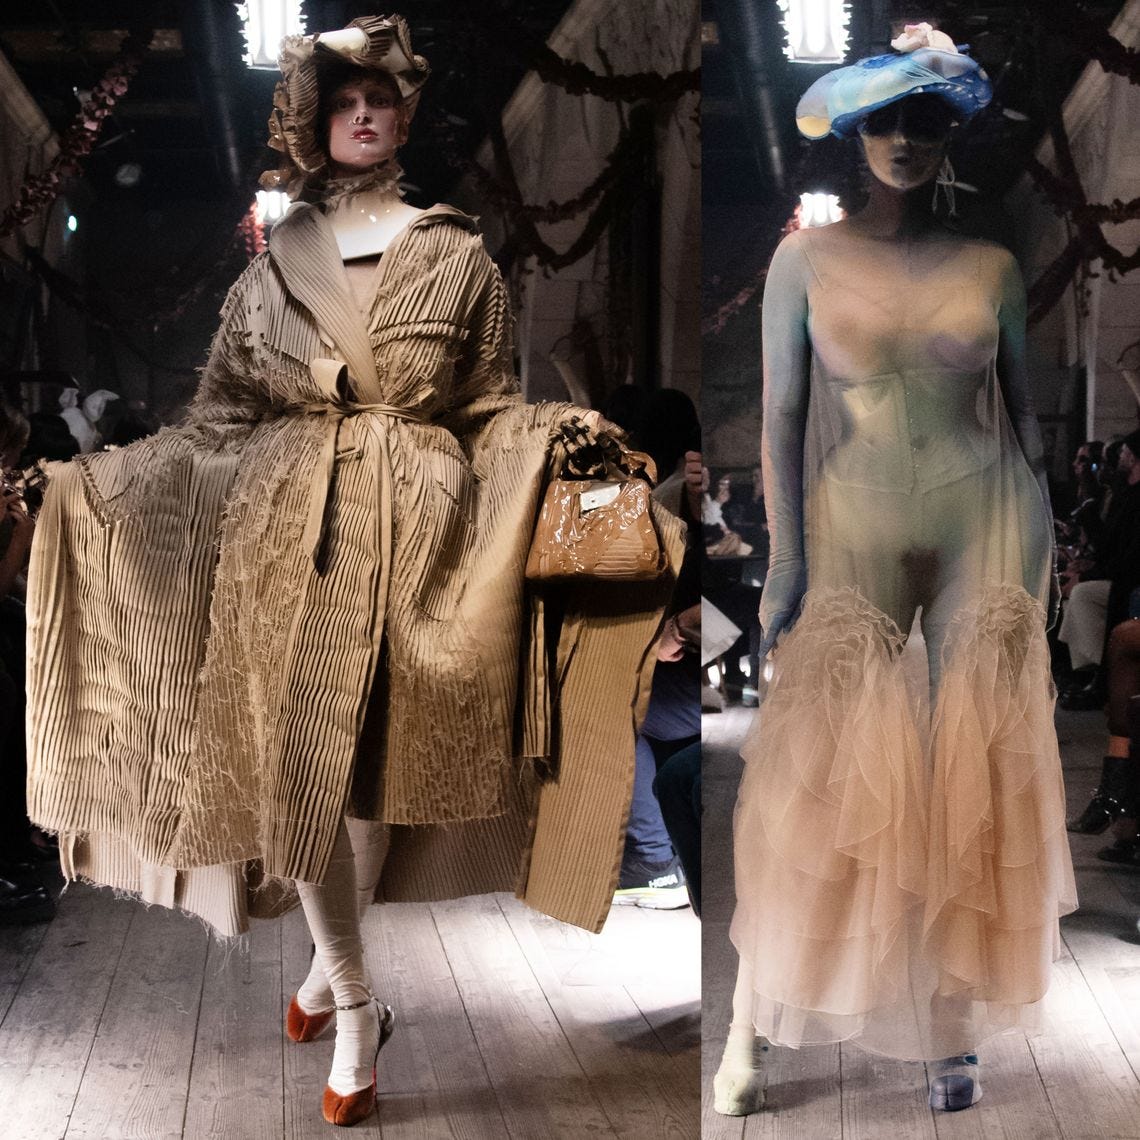 Maison Margiela's Couture Collection Will Go Down in History